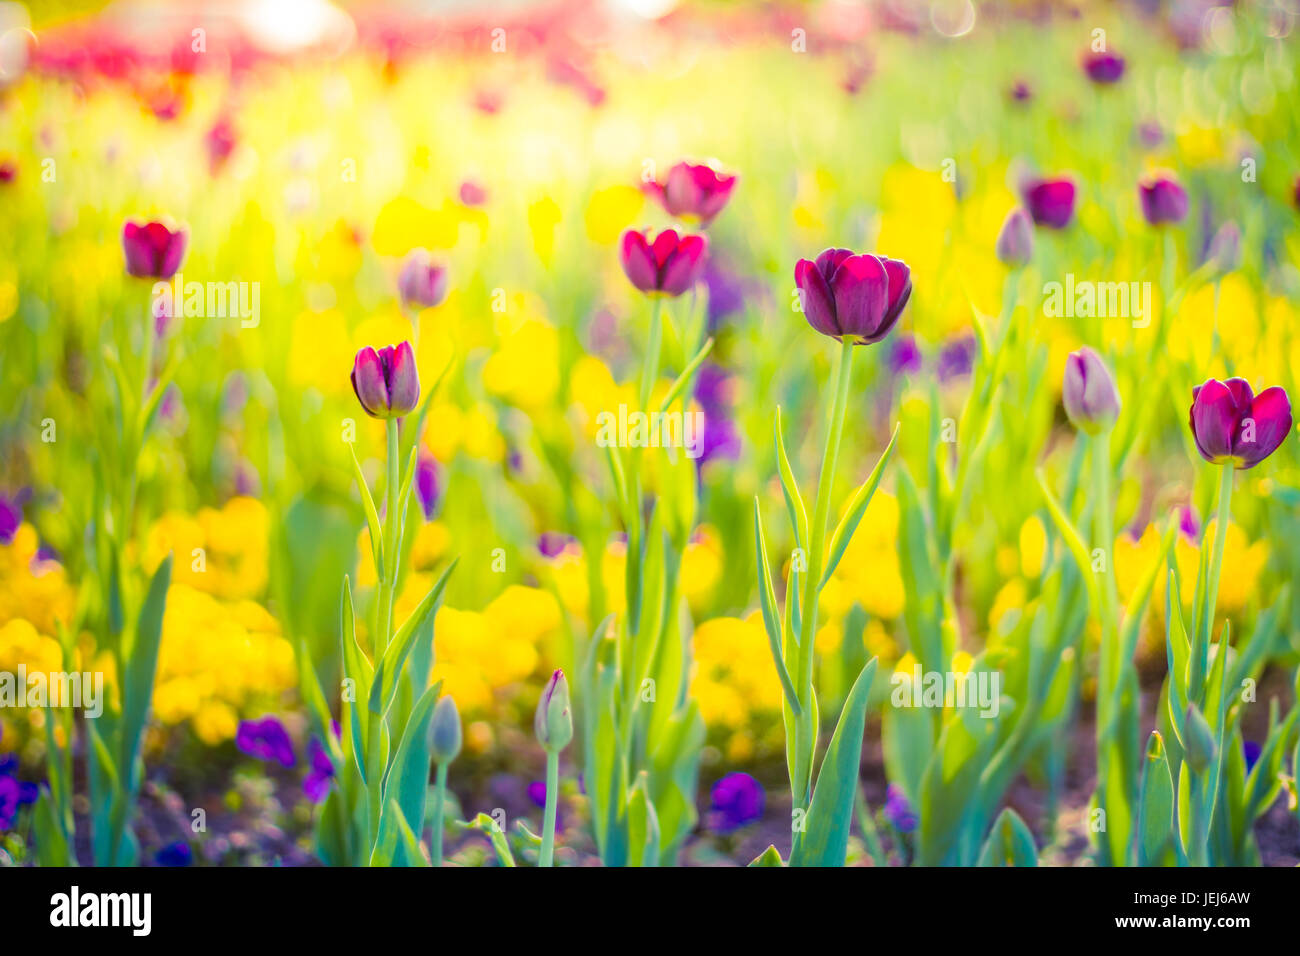 Amazing summer nature flowers, pink tulips and sunlight day landscape. Natural view spring summer flower blooming in the garden green grass background Stock Photo